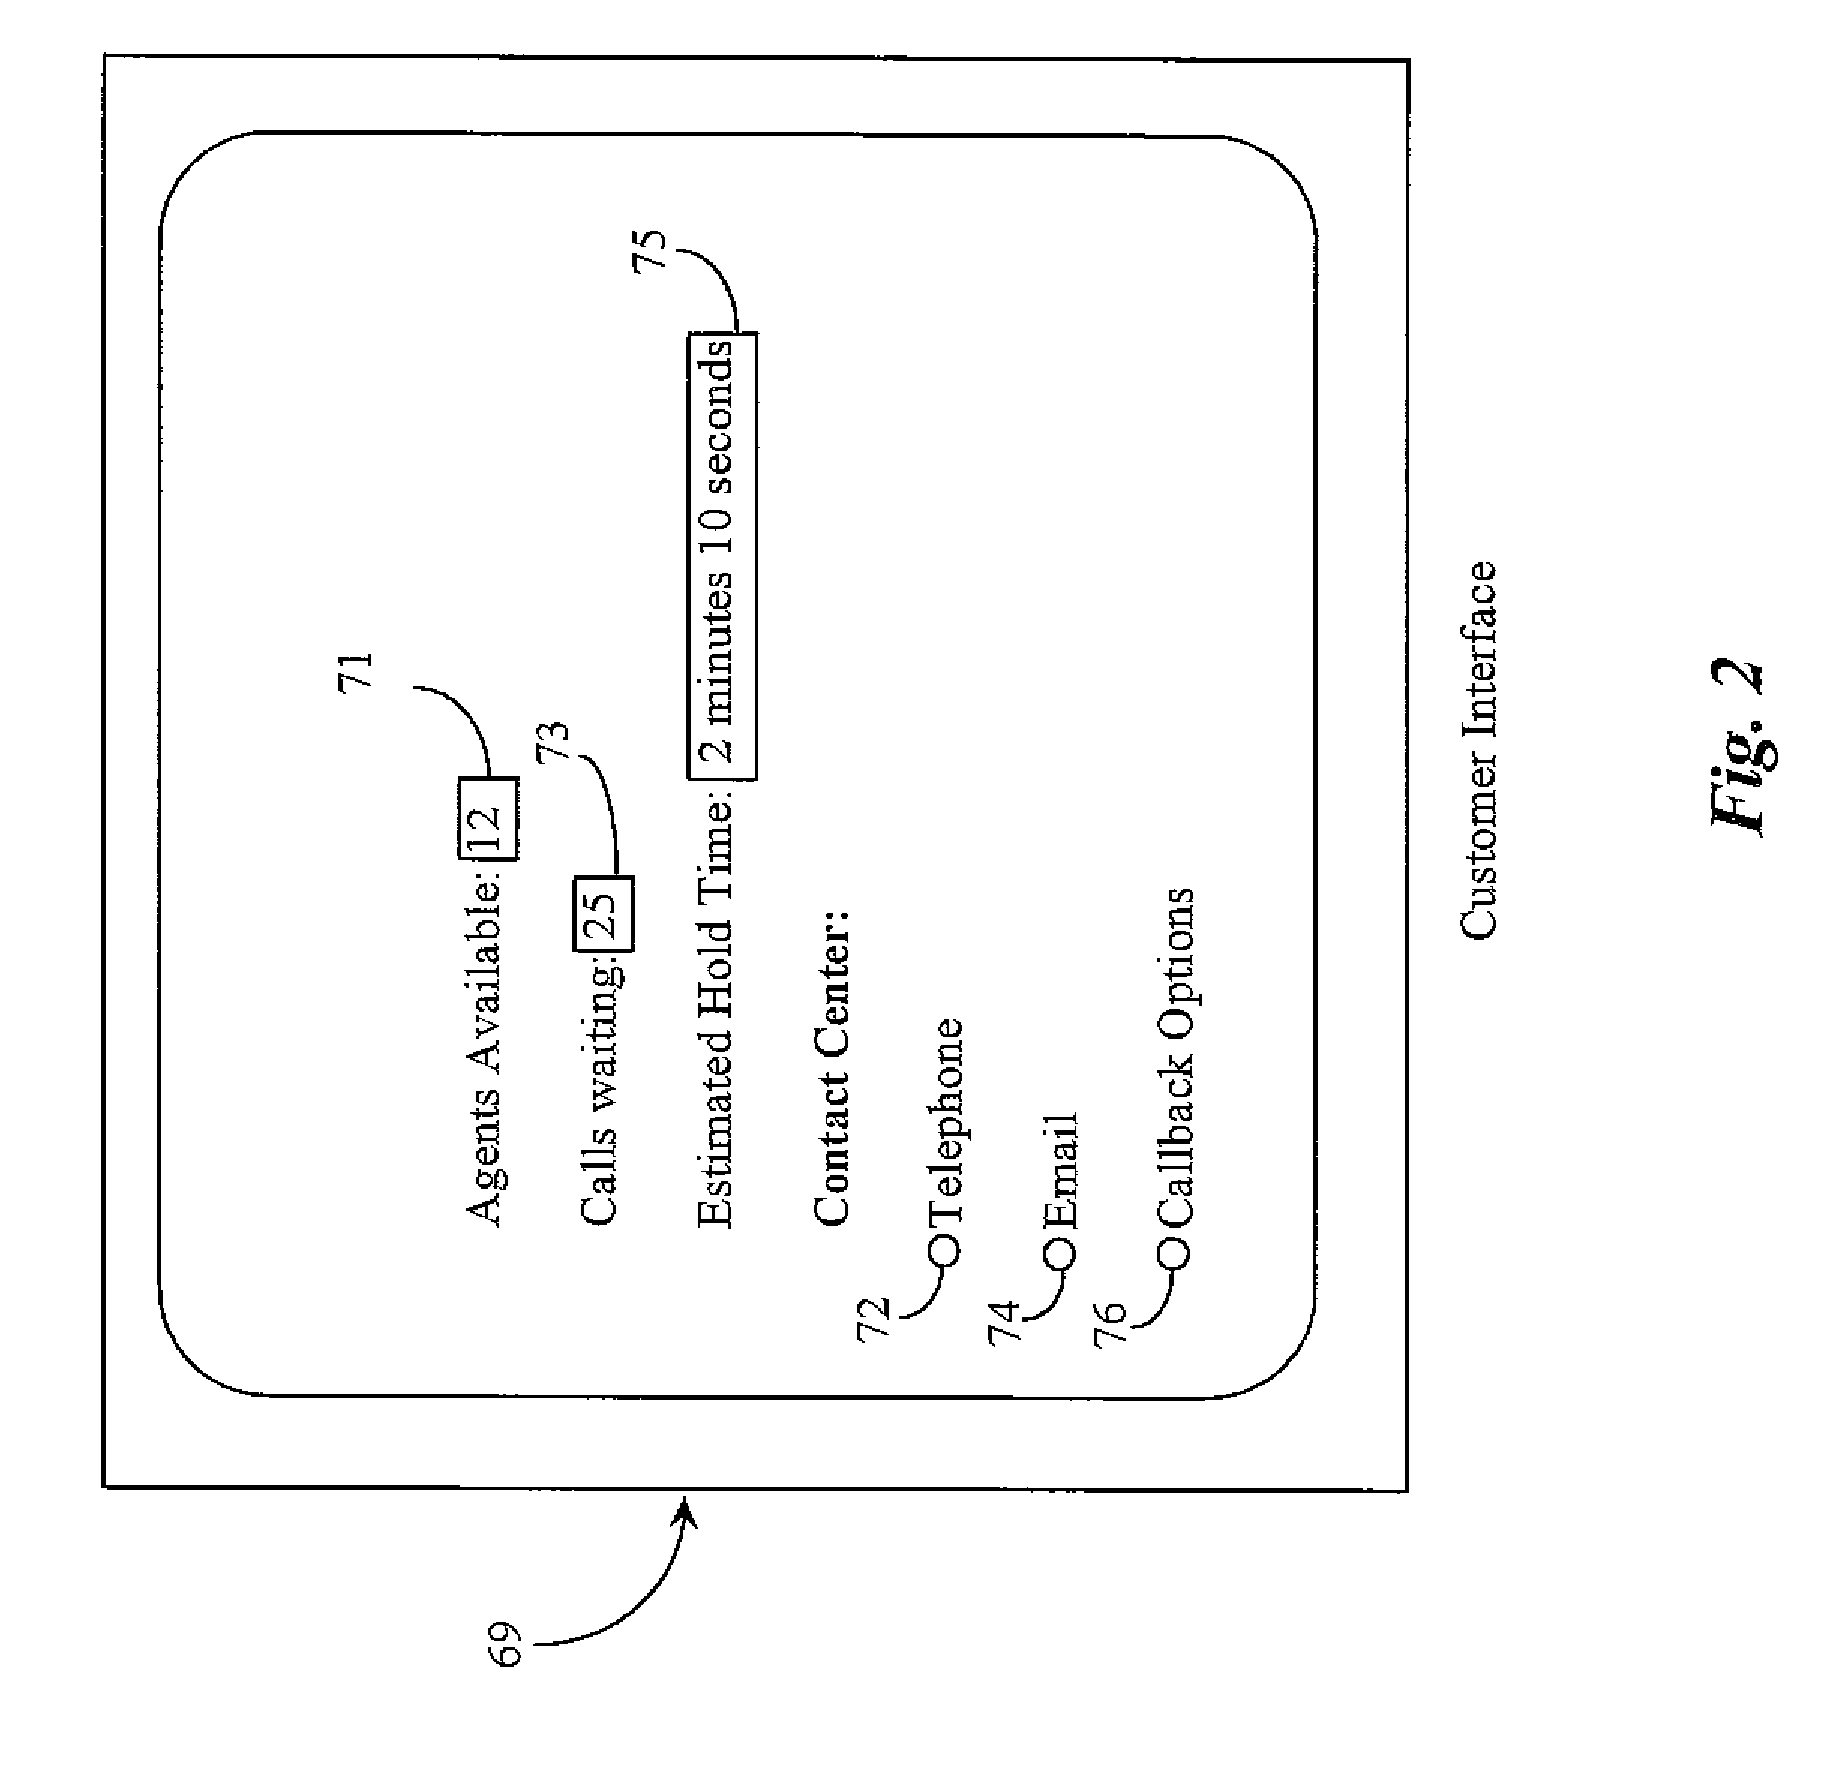 Method and Apparatus for Optimizing Response Time to Events in Queue